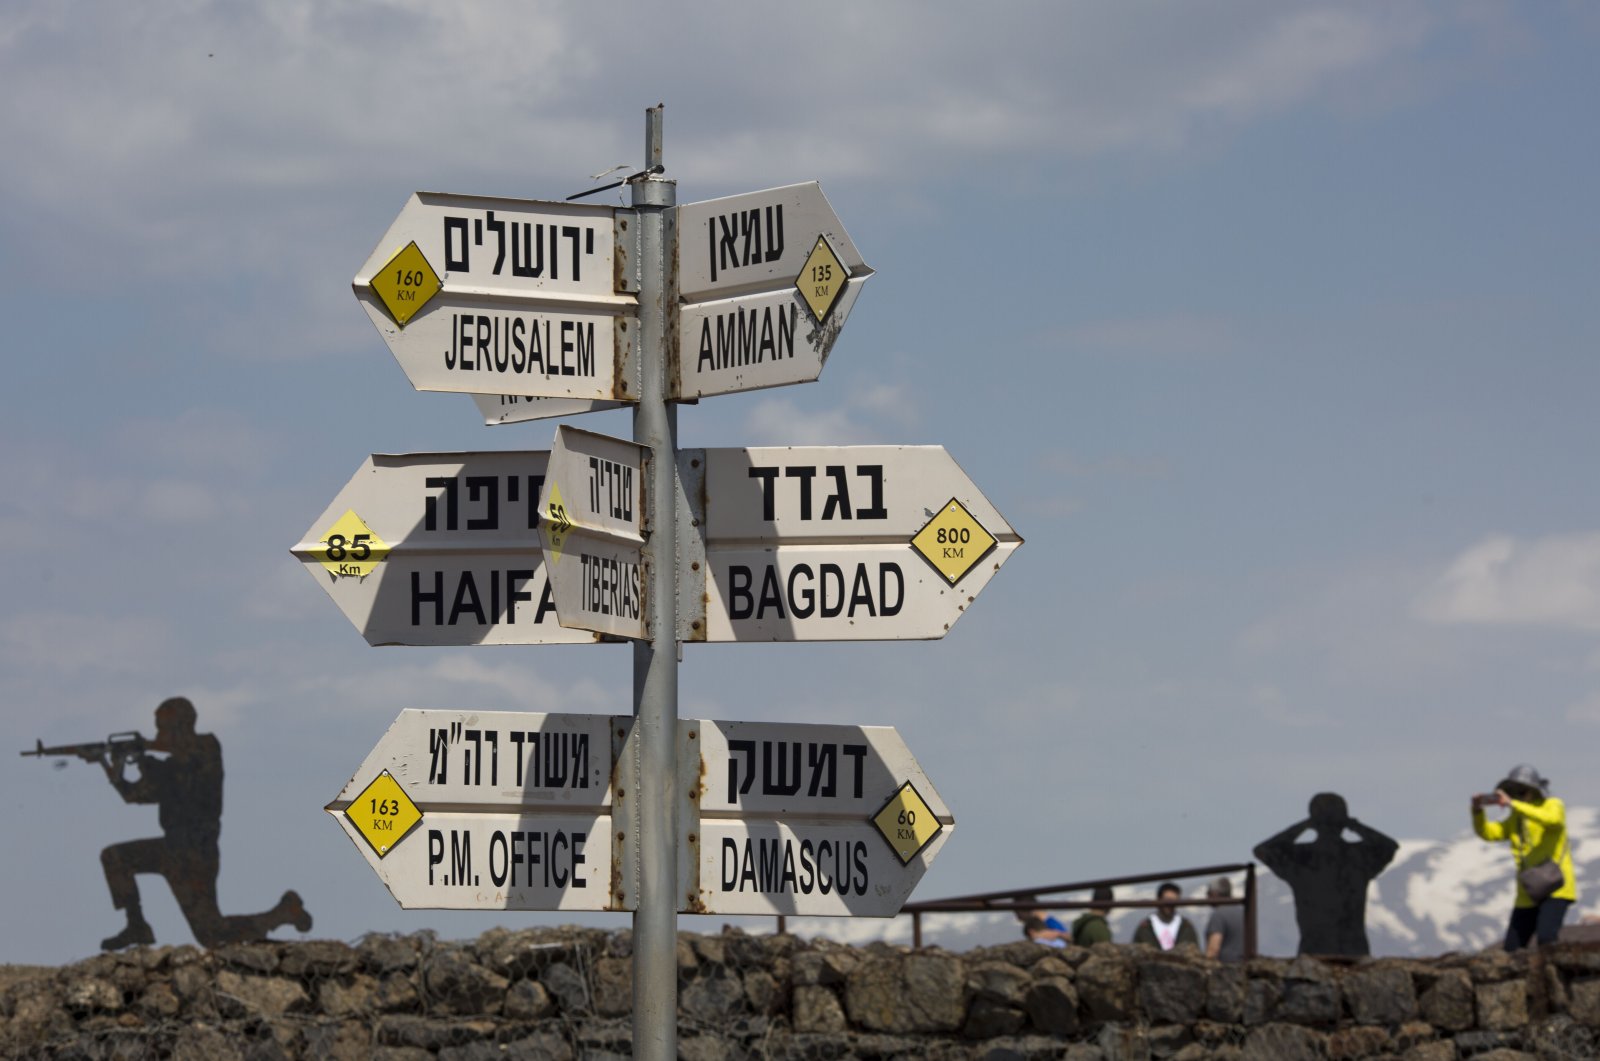 People take photographs next to a mock road sign pointing to Damascus, the capital of Syria, and other cities at an old outpost in the Israeli controlled Golan Heights near the border with Syria, March 22, 2019. (AP Photo)